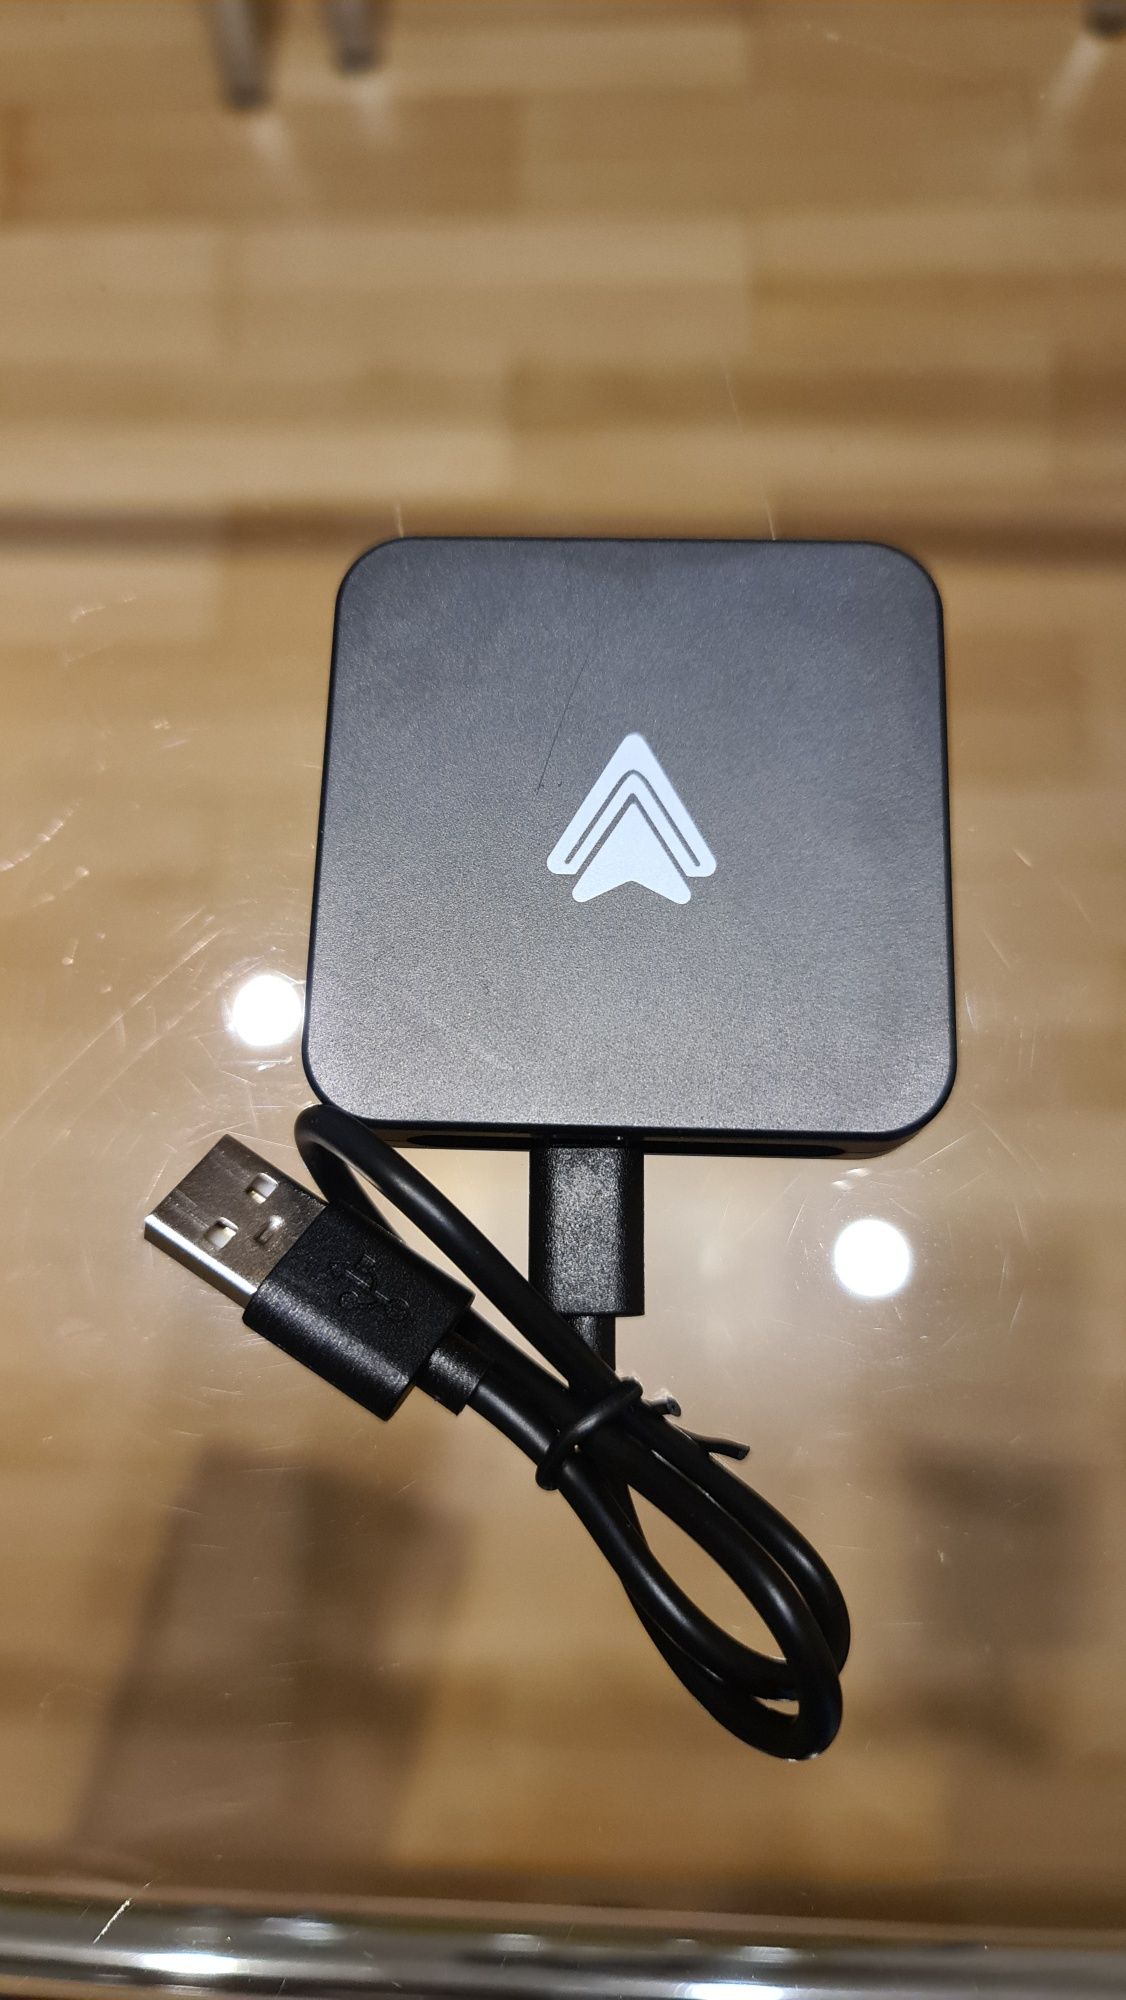 Android Auto wired to wireless устройство